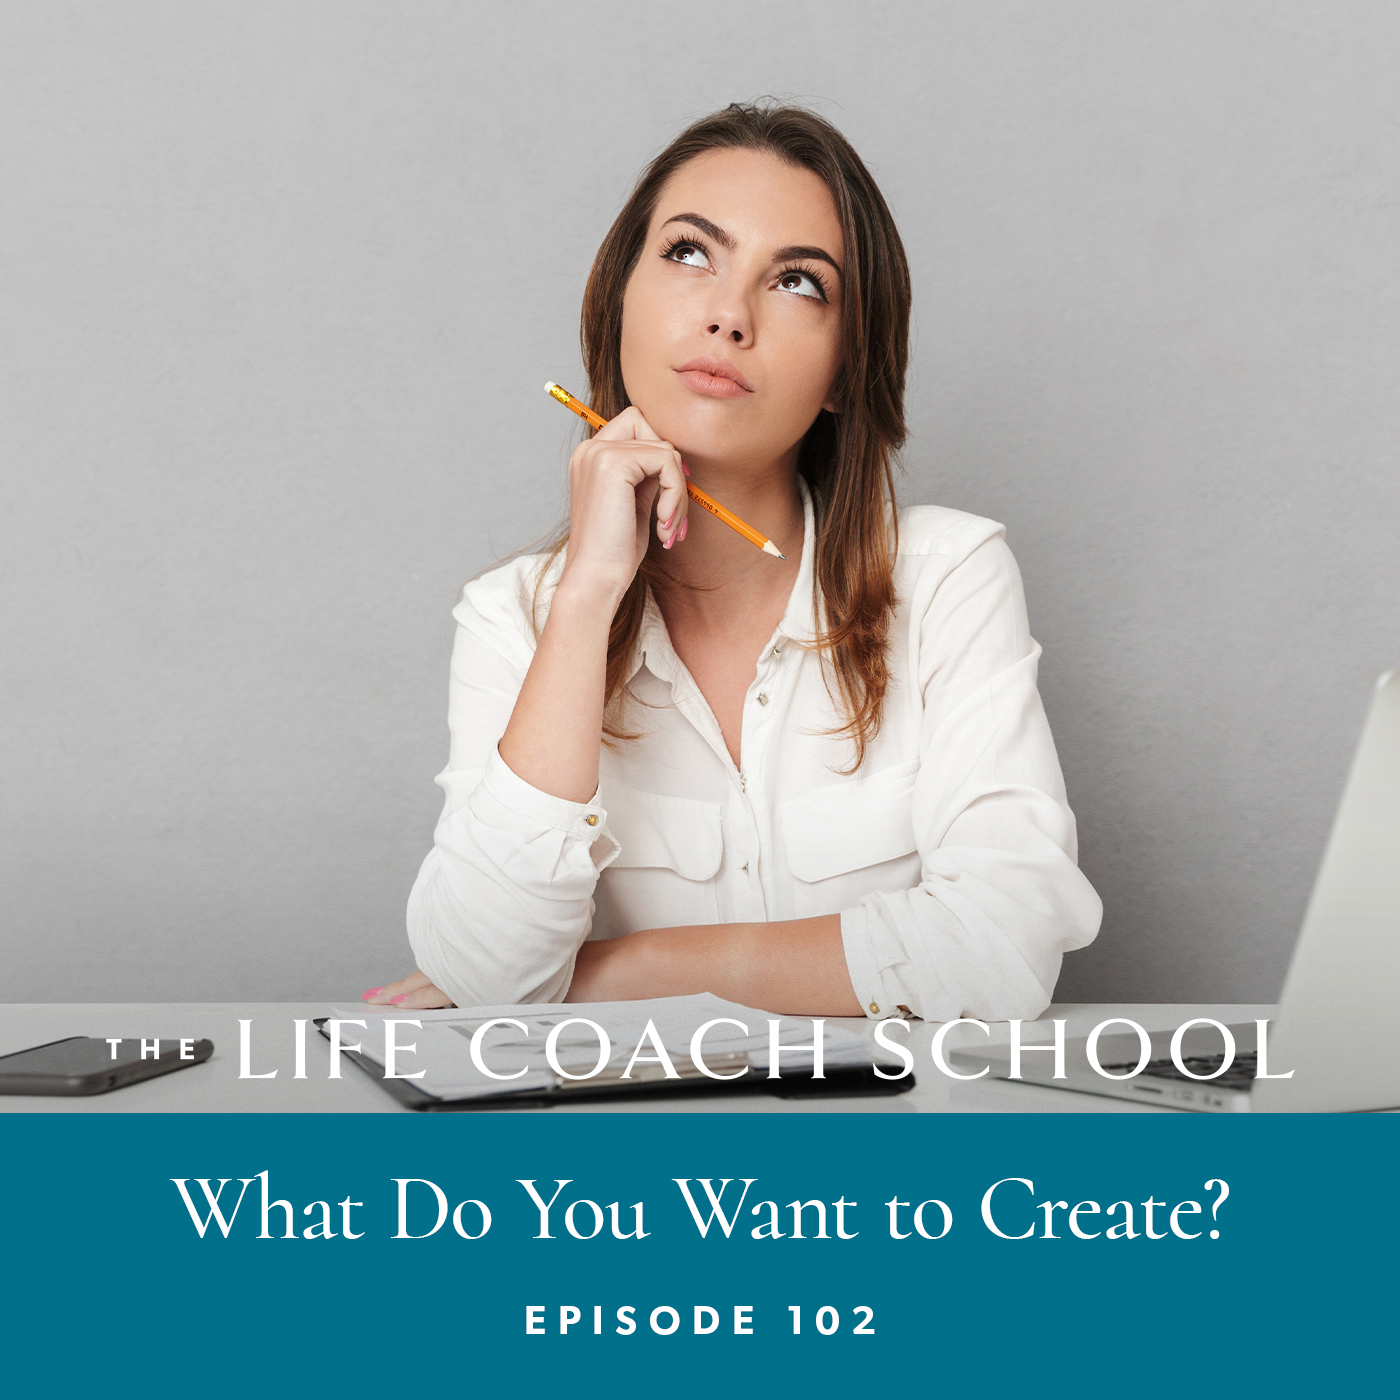 The Life Coach School Podcast with Brooke Castillo | Episode 102 | What Do You Want To Create?